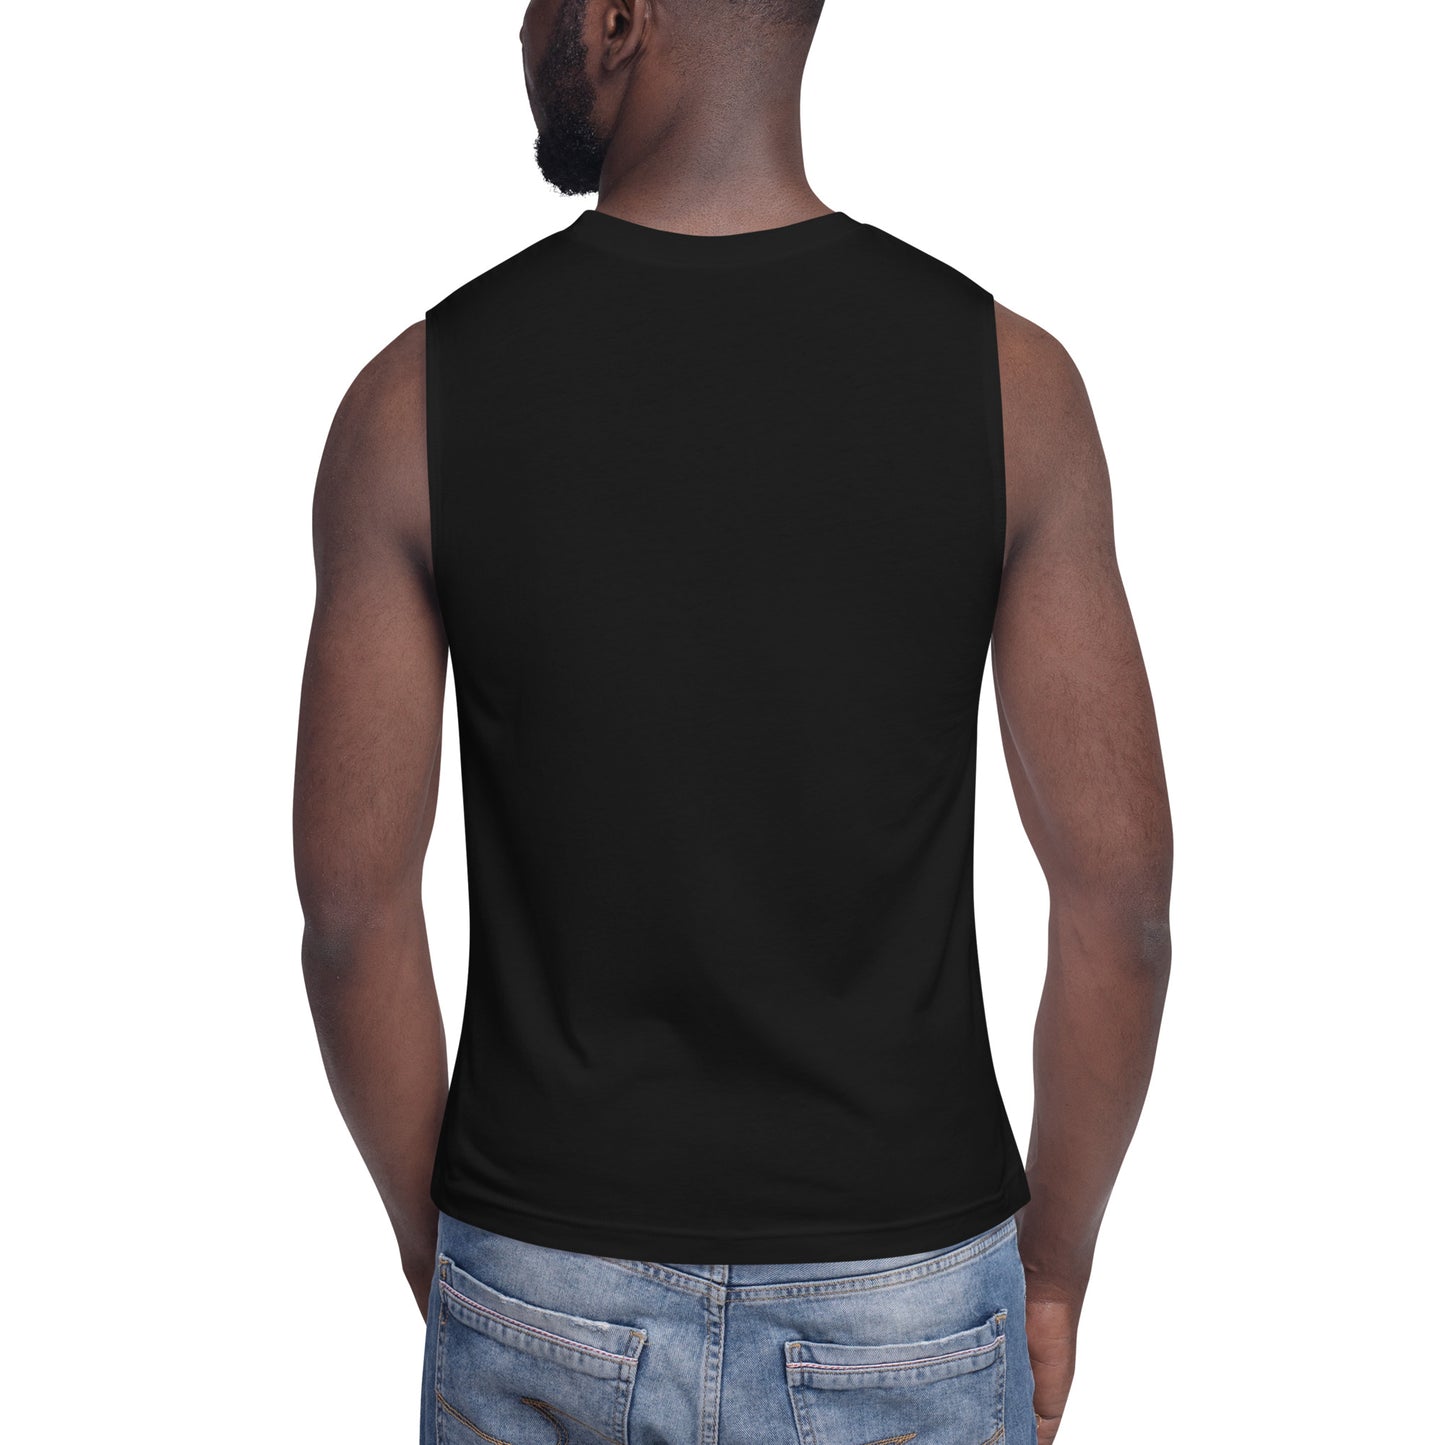 BE YOURSELF Muscle Shirt